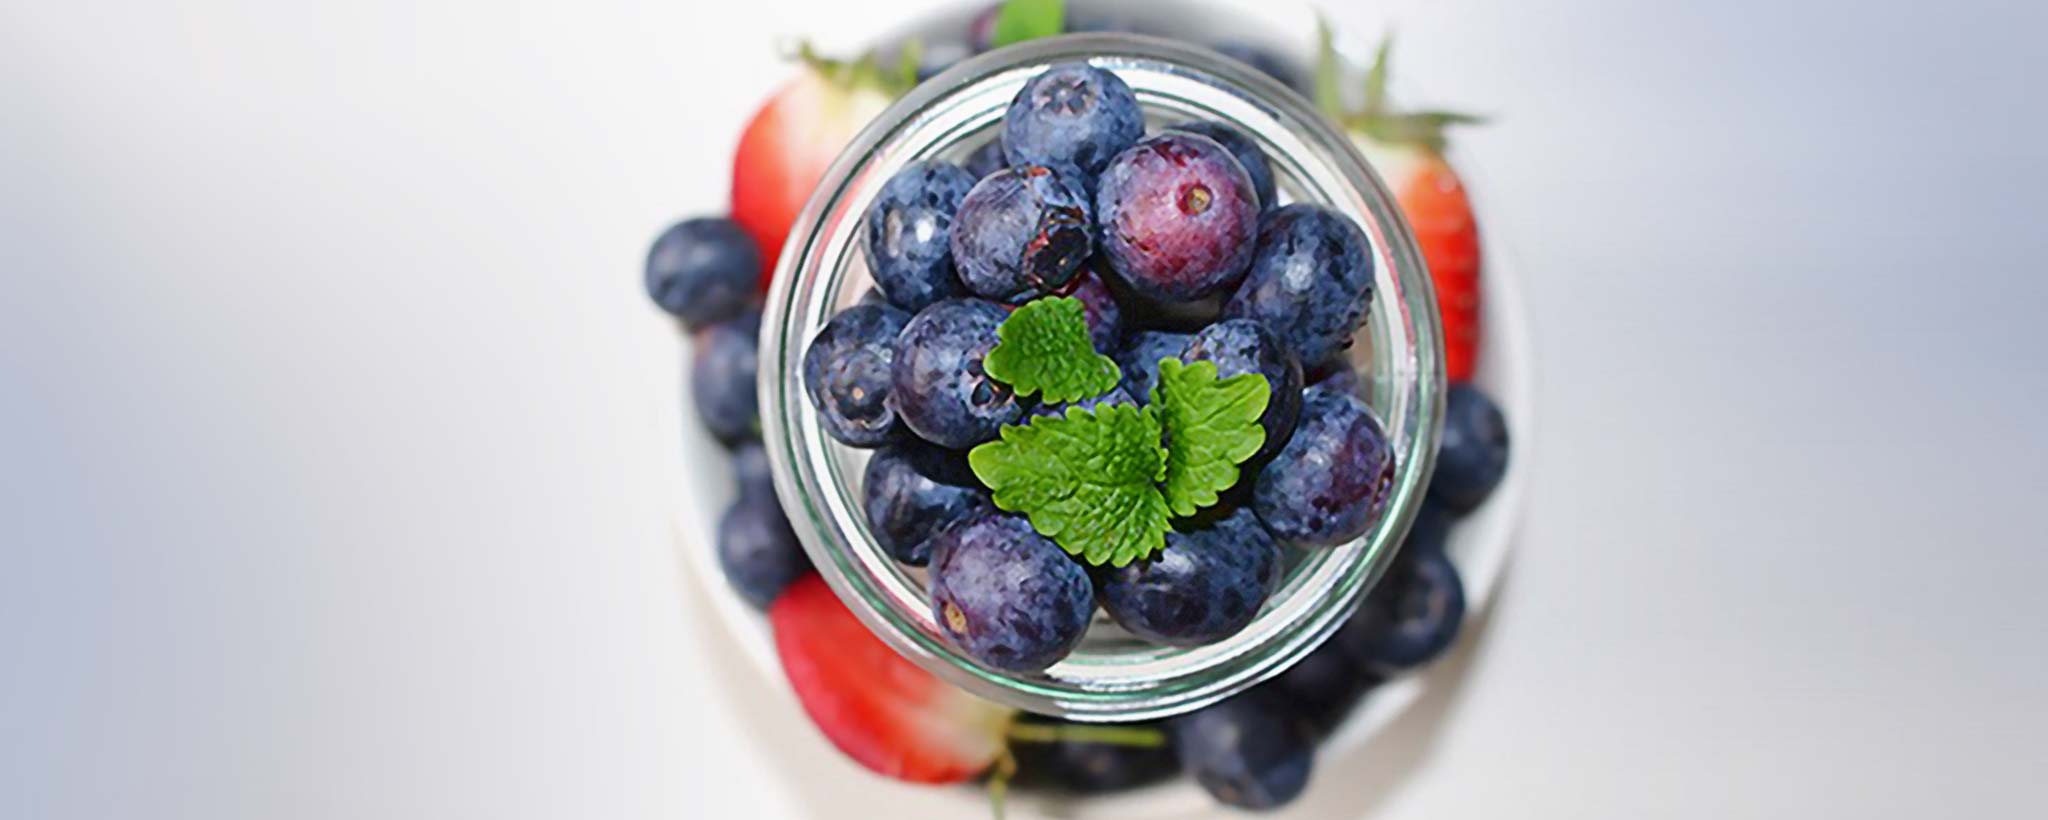 '11 Benefits of Blueberries Backed by Science'